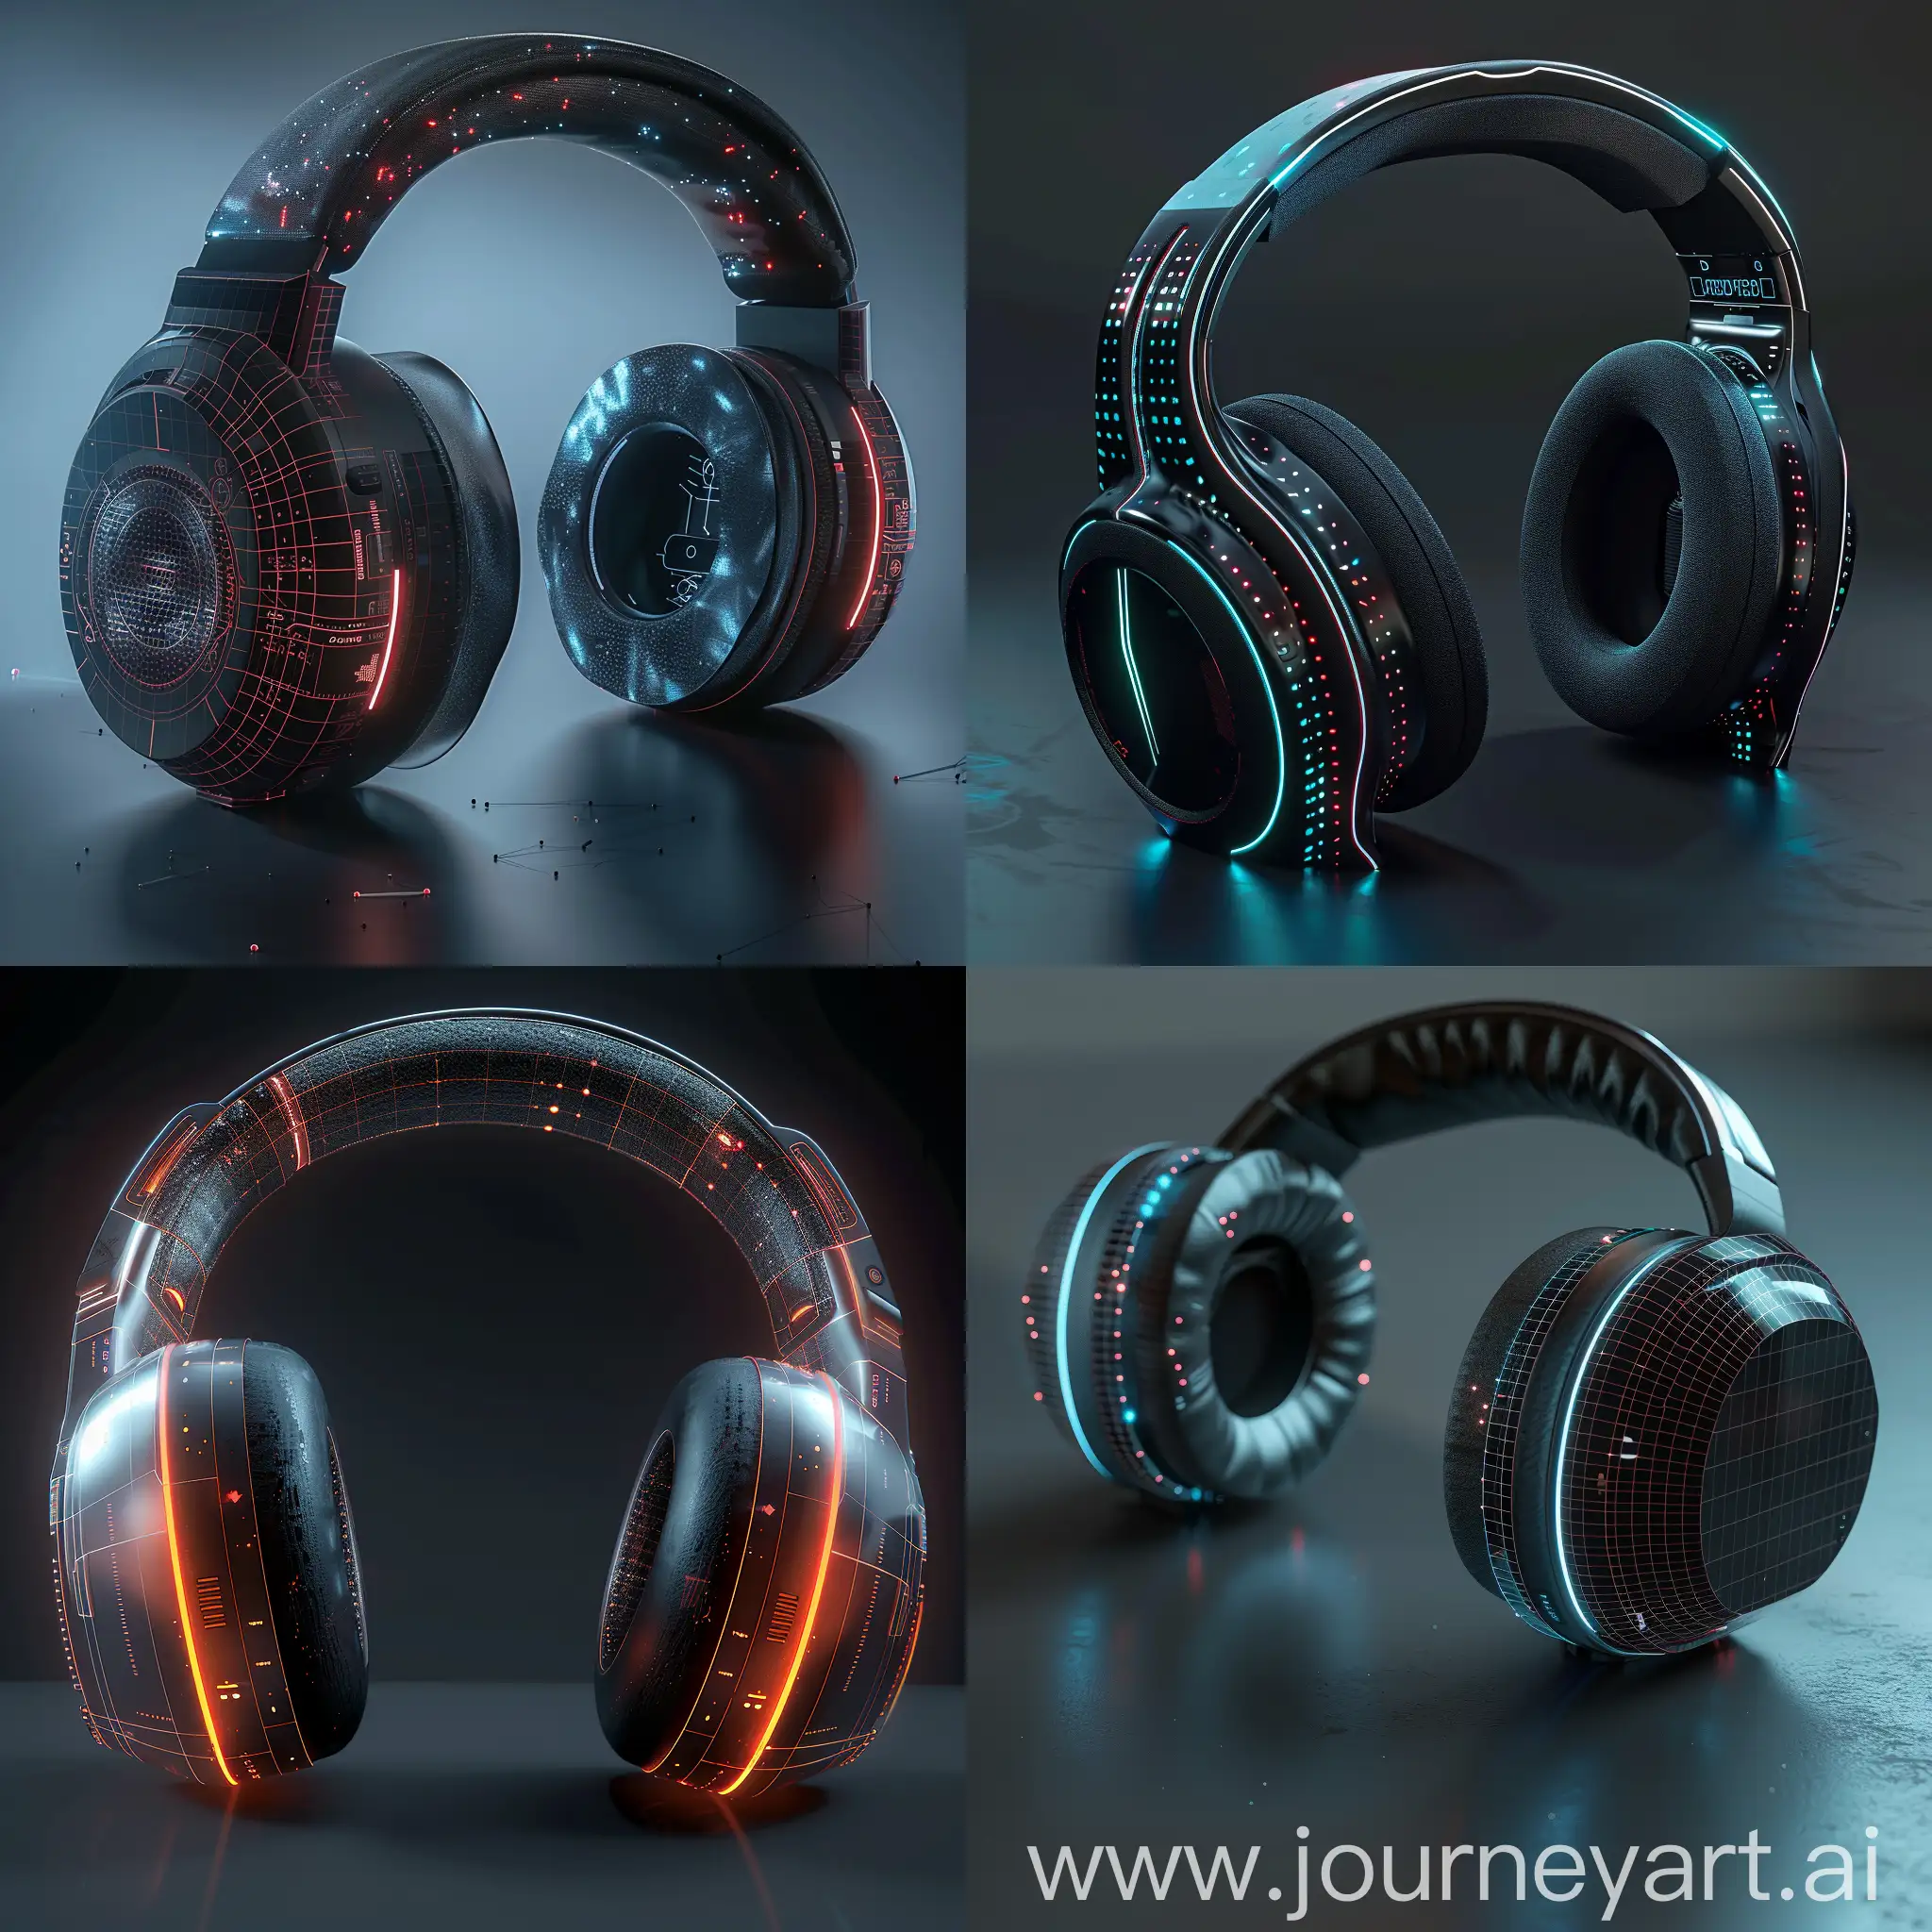 Futuristic-PC-Headphones-with-Advanced-Driver-Technology-and-Customizable-LED-Lighting